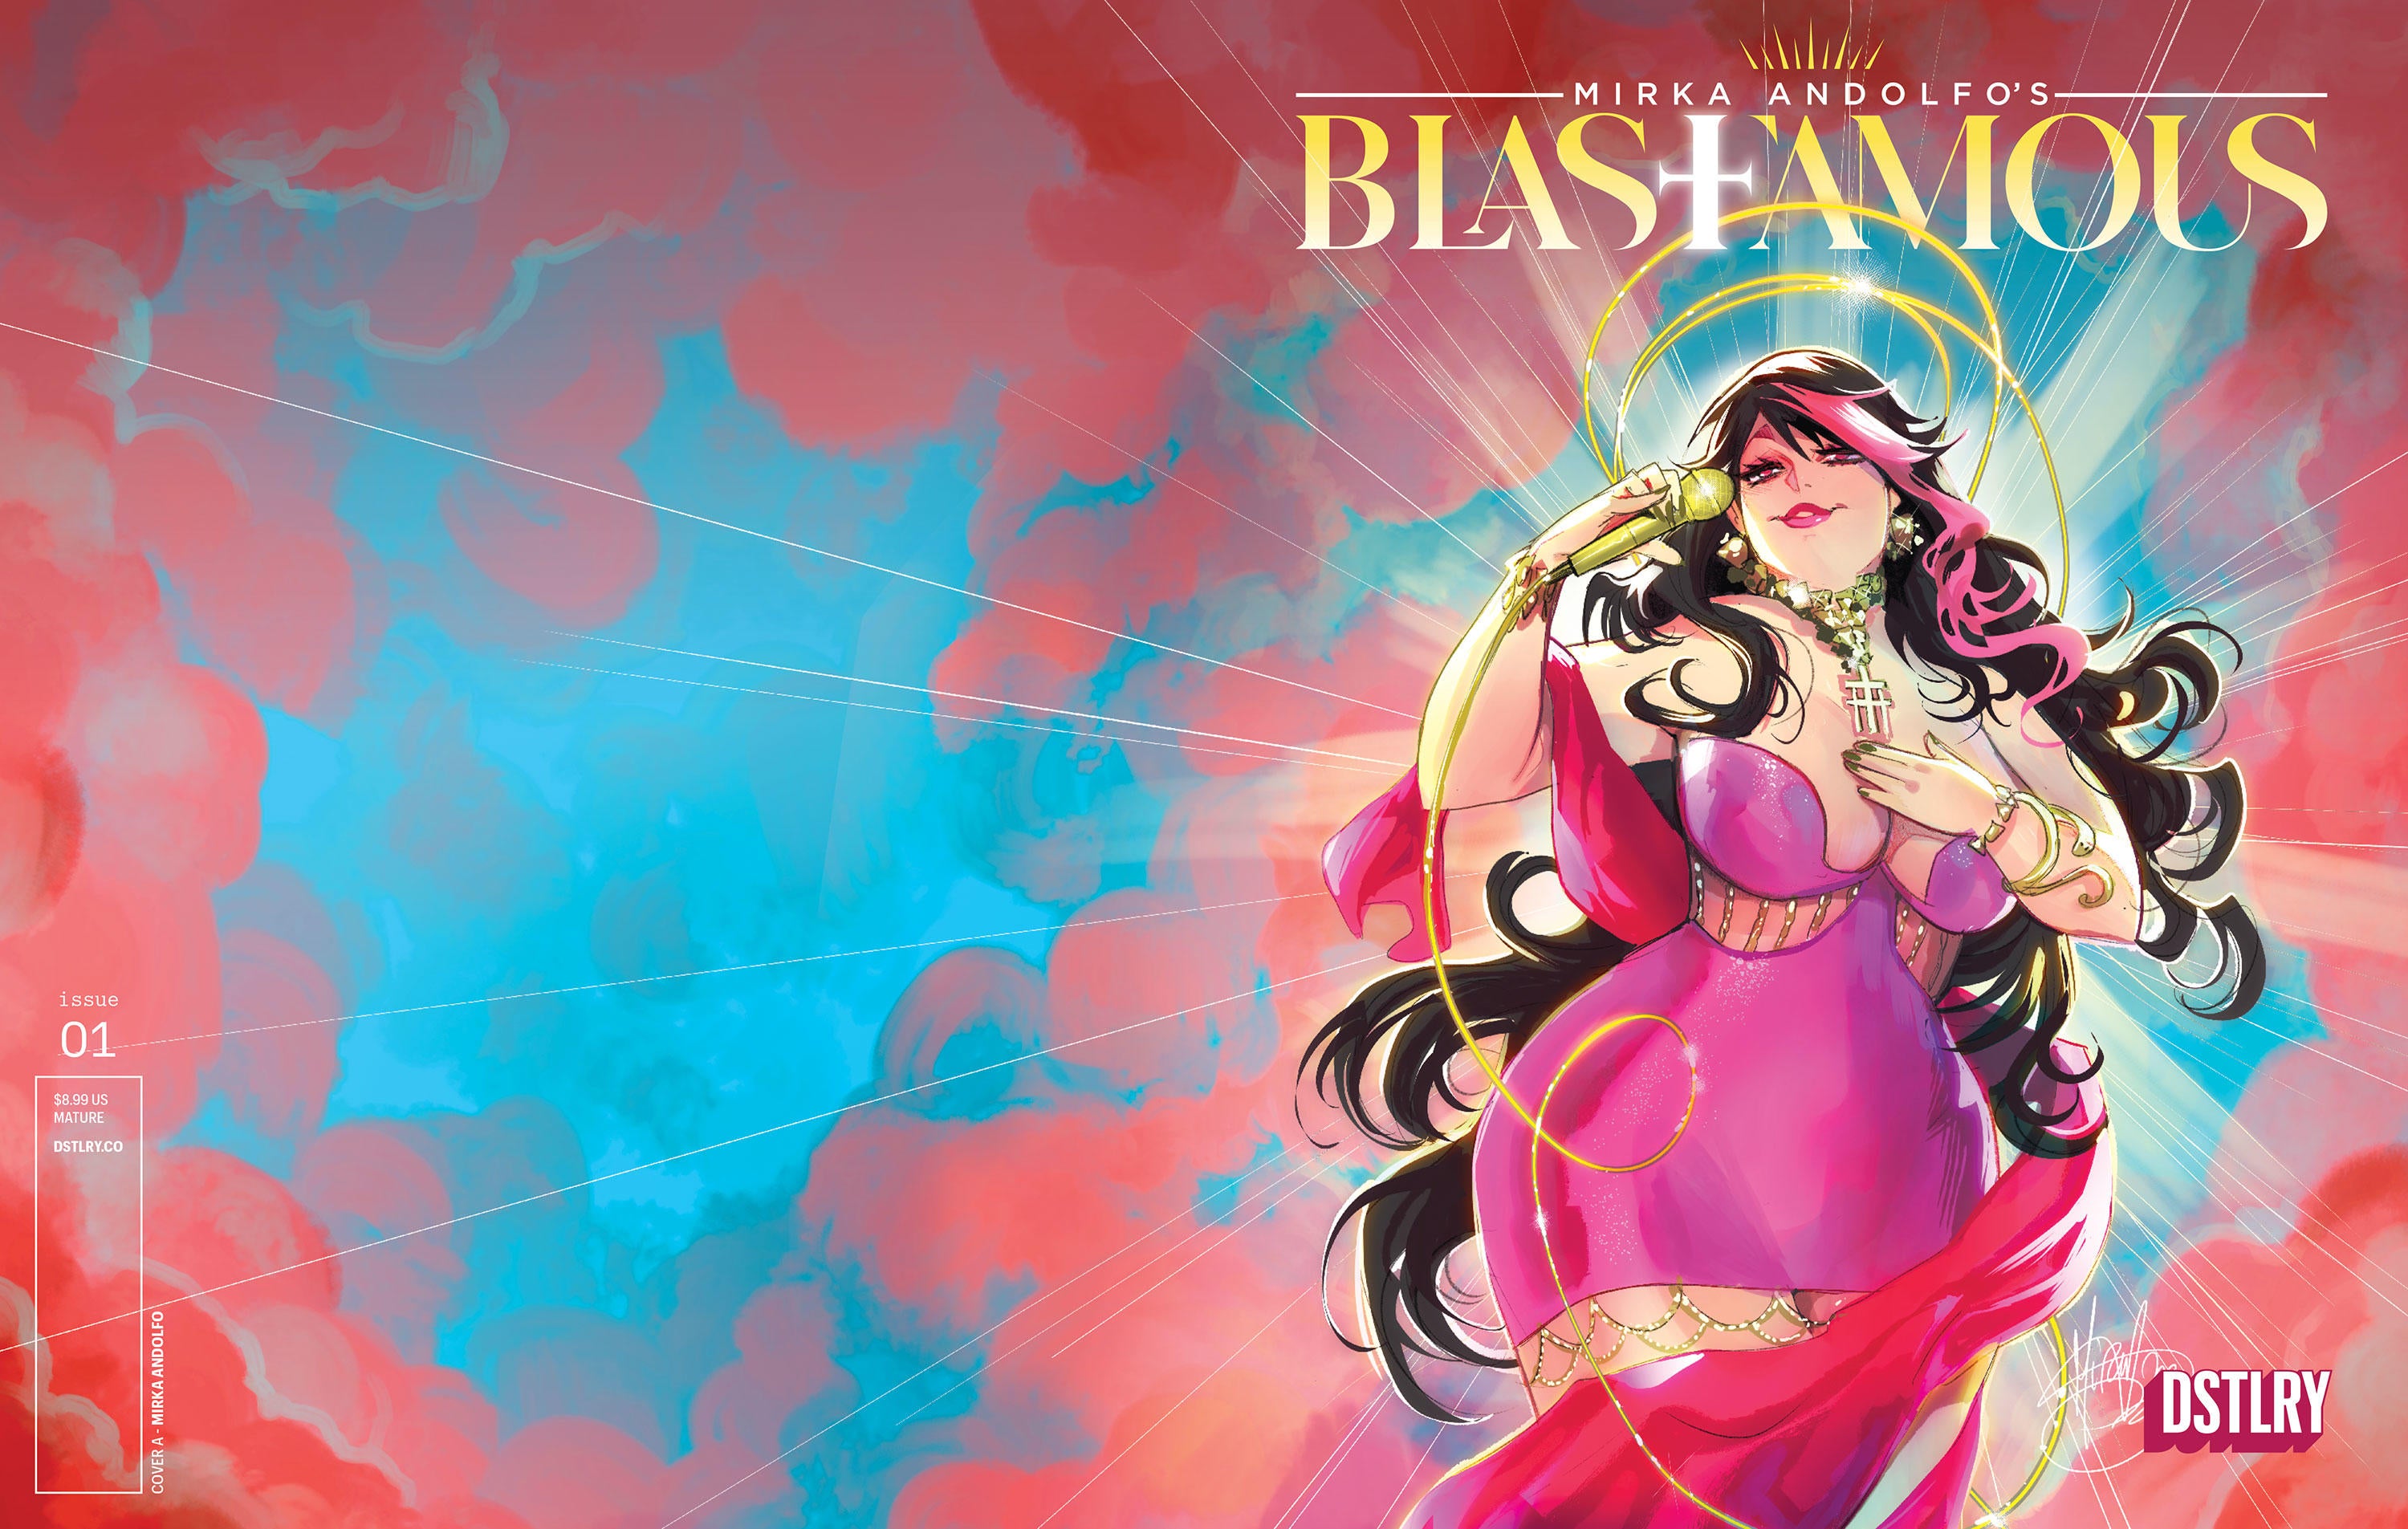 DSTLRY Reveals First Look Preview of Mirka Andolfo's Blasfamous #1 (Exclusive)